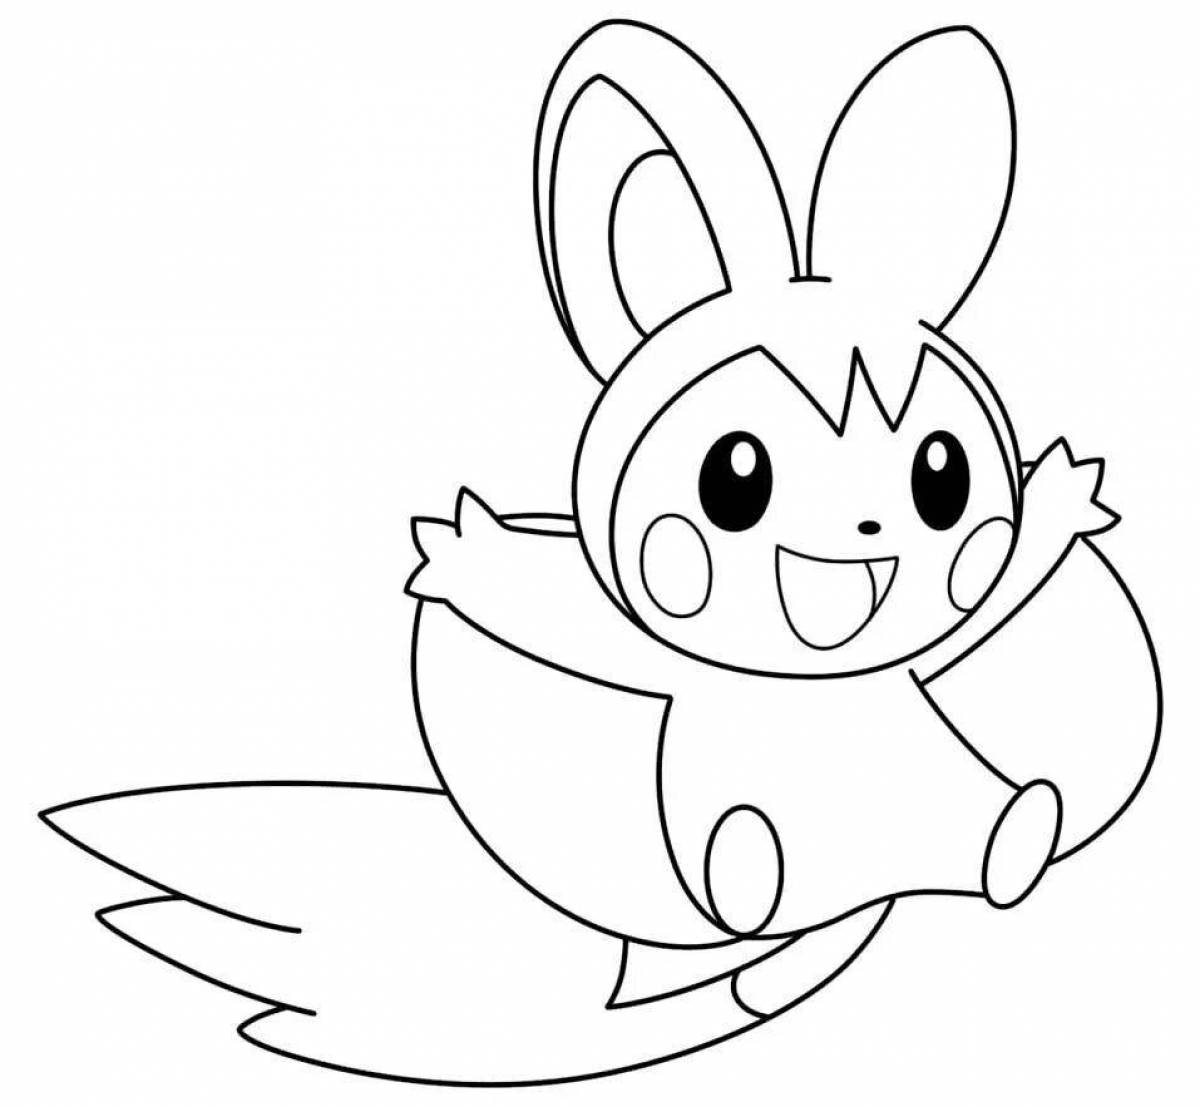 Outstanding good quality pokemon coloring page